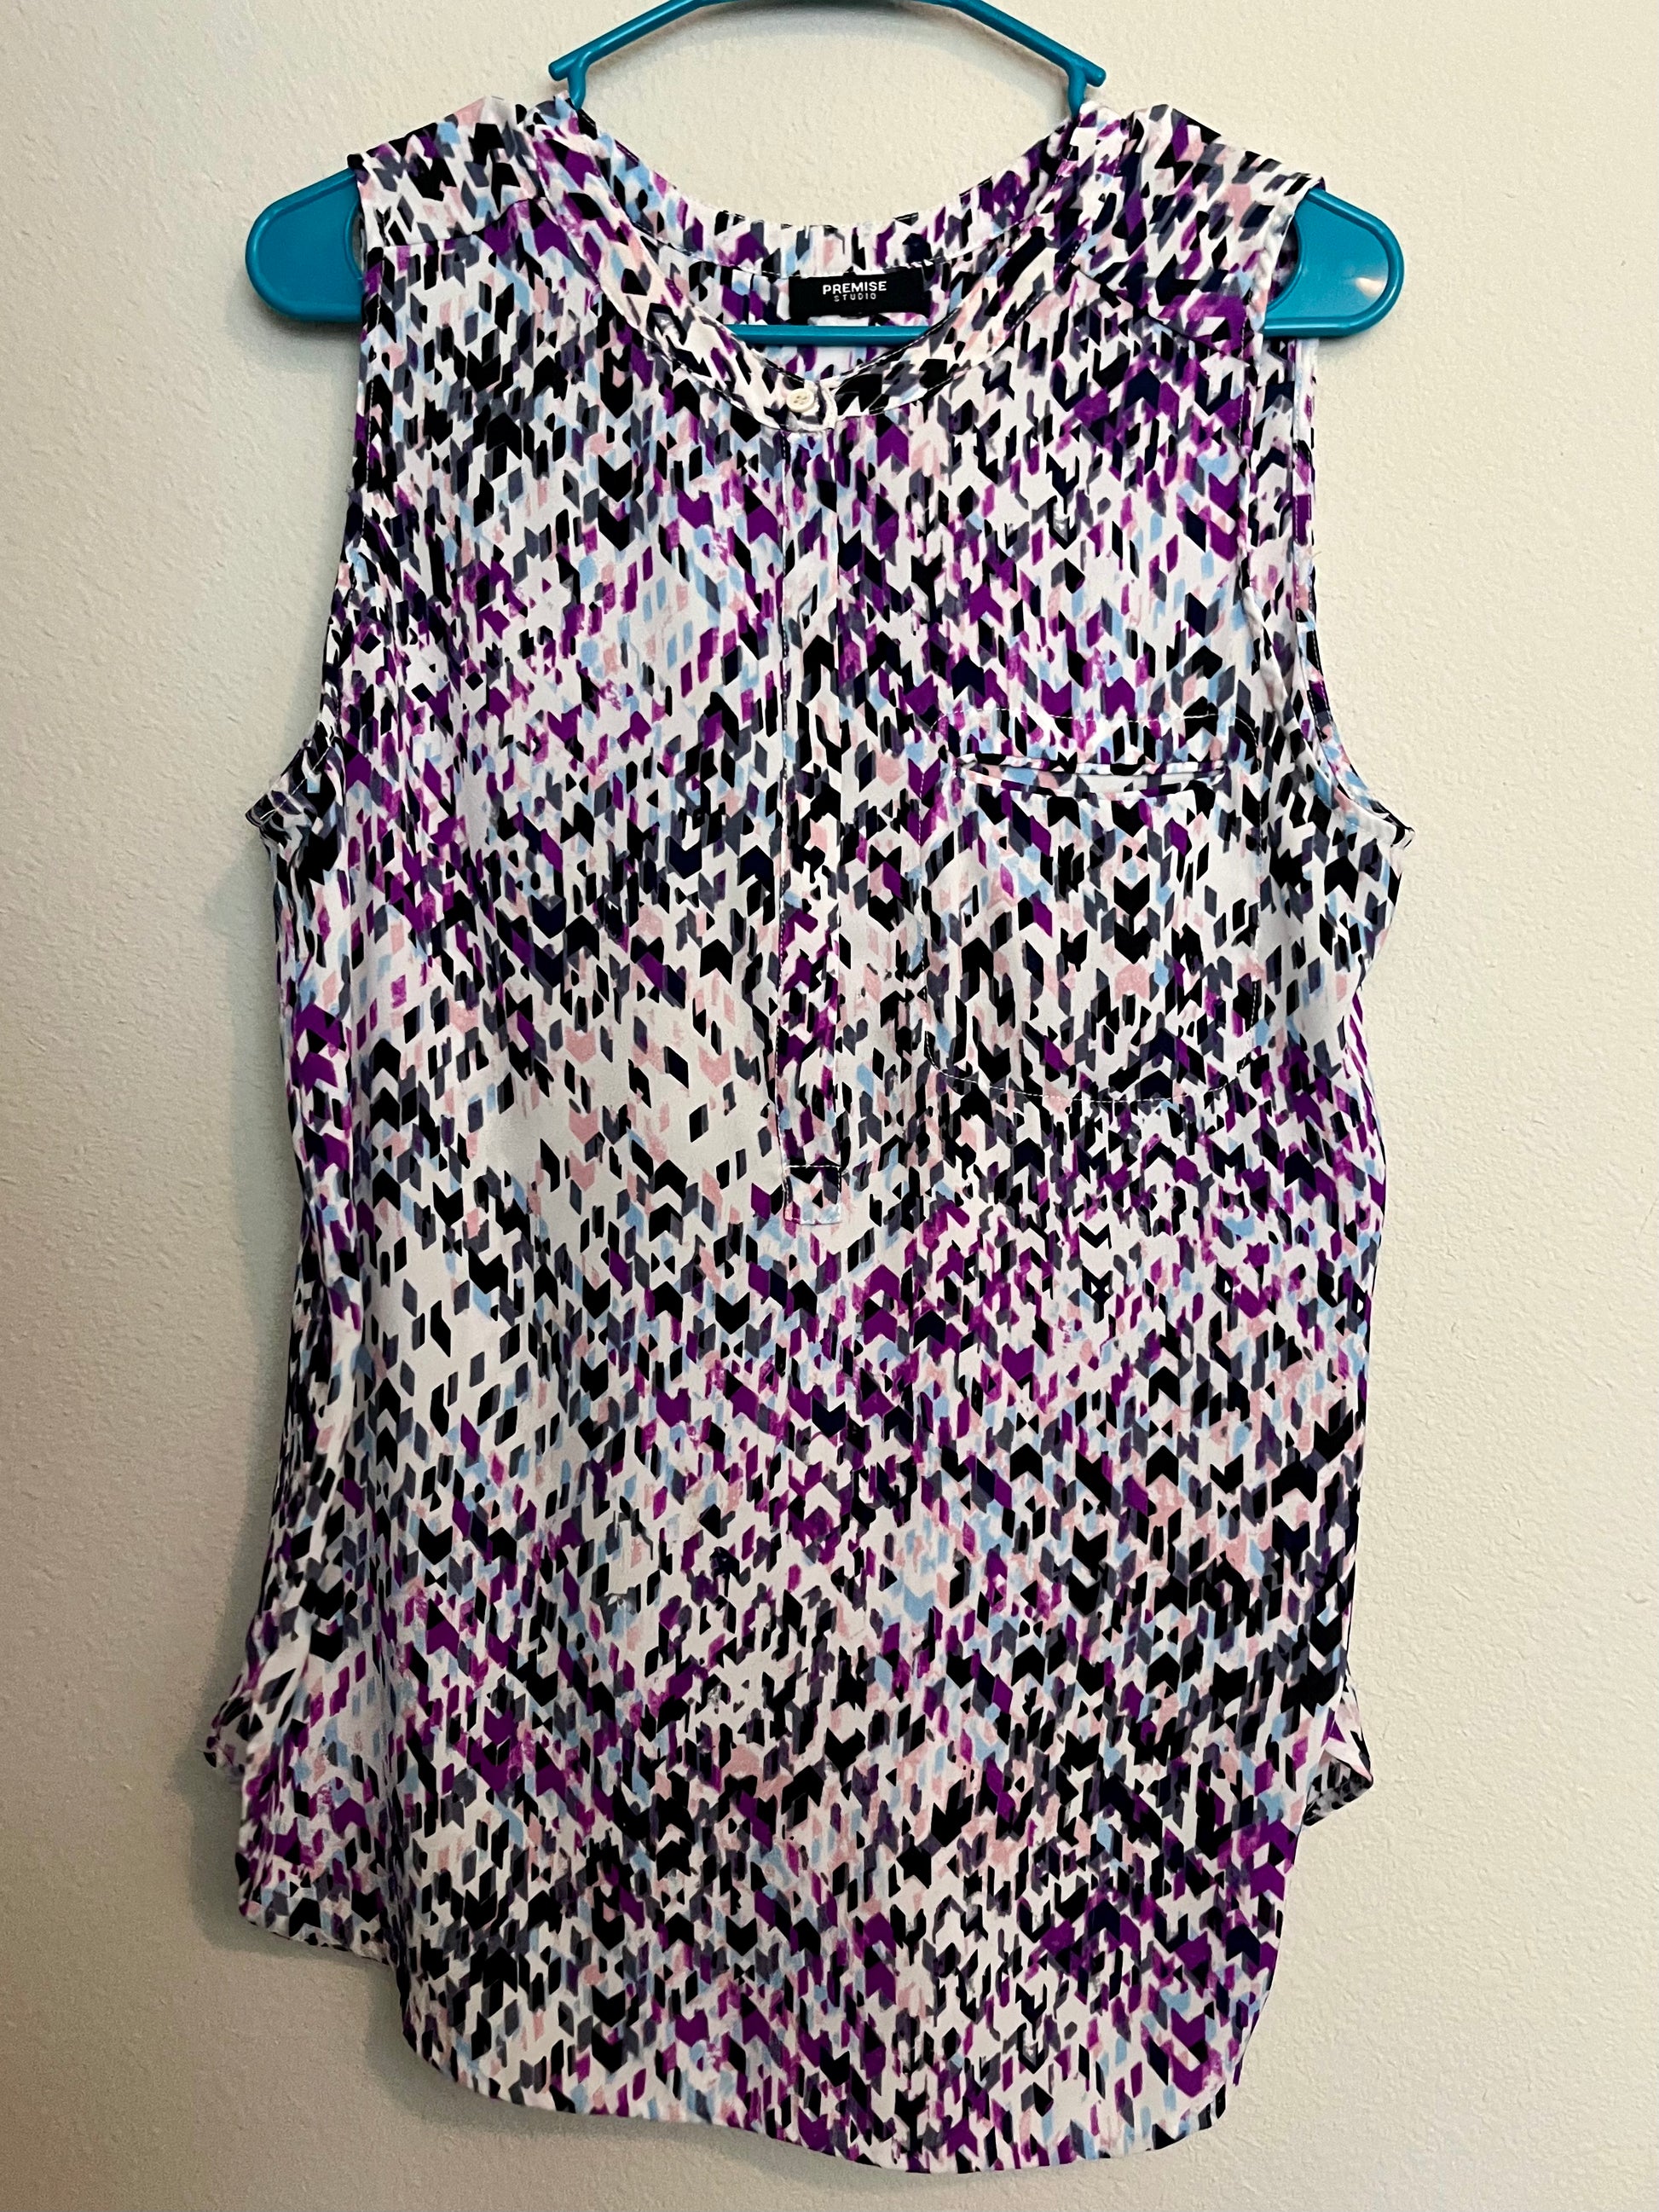 Sleeveless Blouse by Premise Studio, Size Medium - Tales from the Tangle